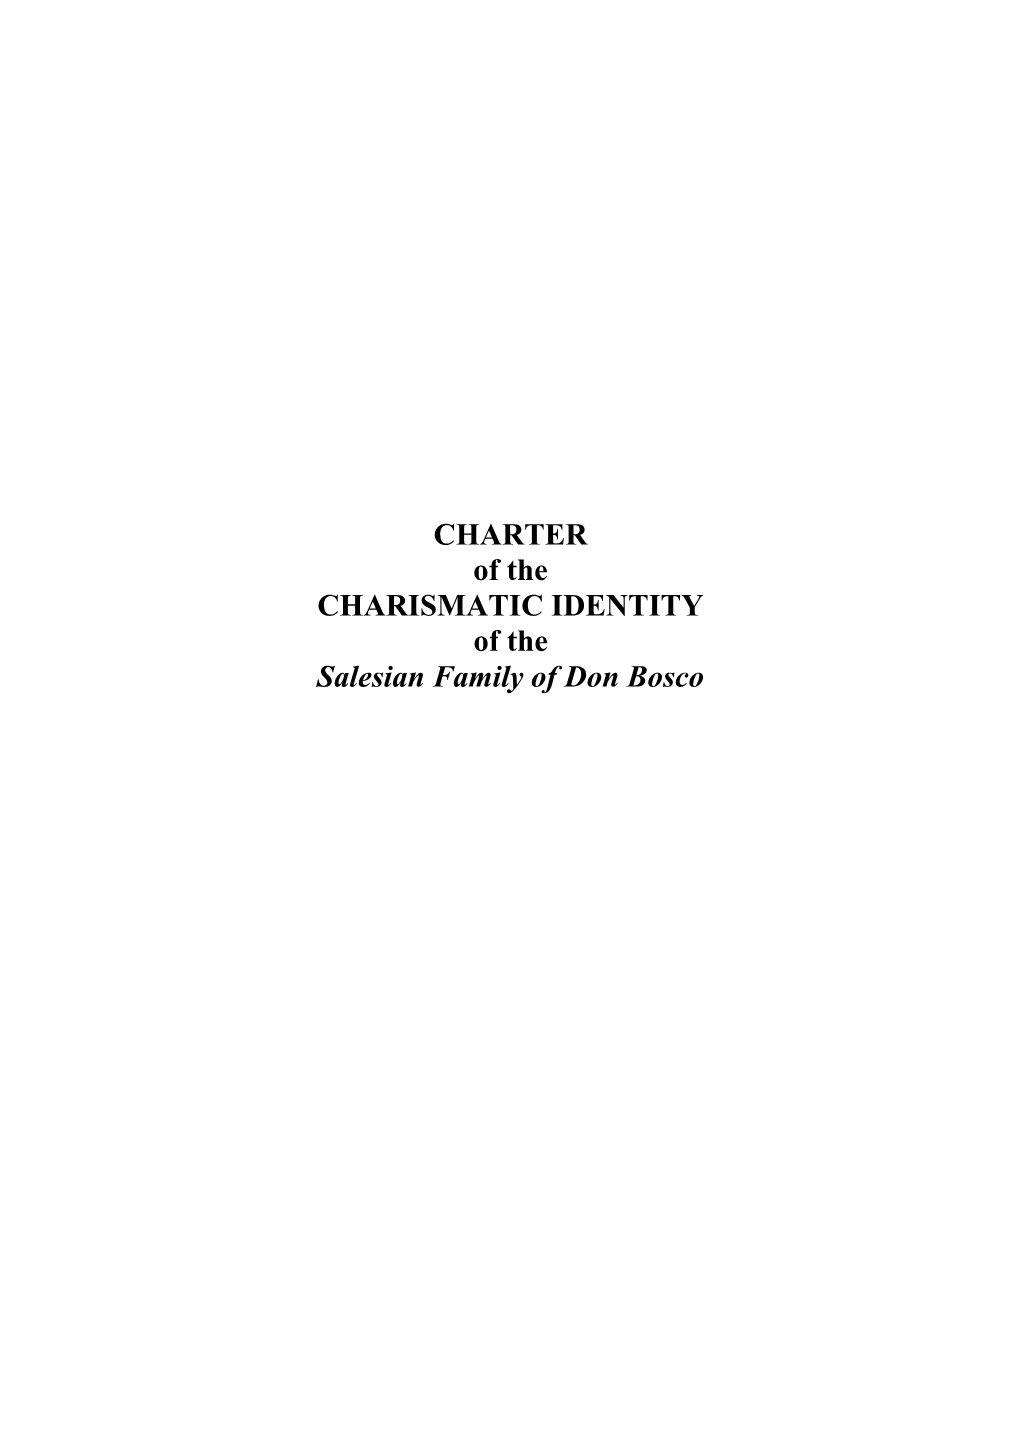 CHARTER of the CHARISMATIC IDENTITY of the Salesian Family of Don Bosco